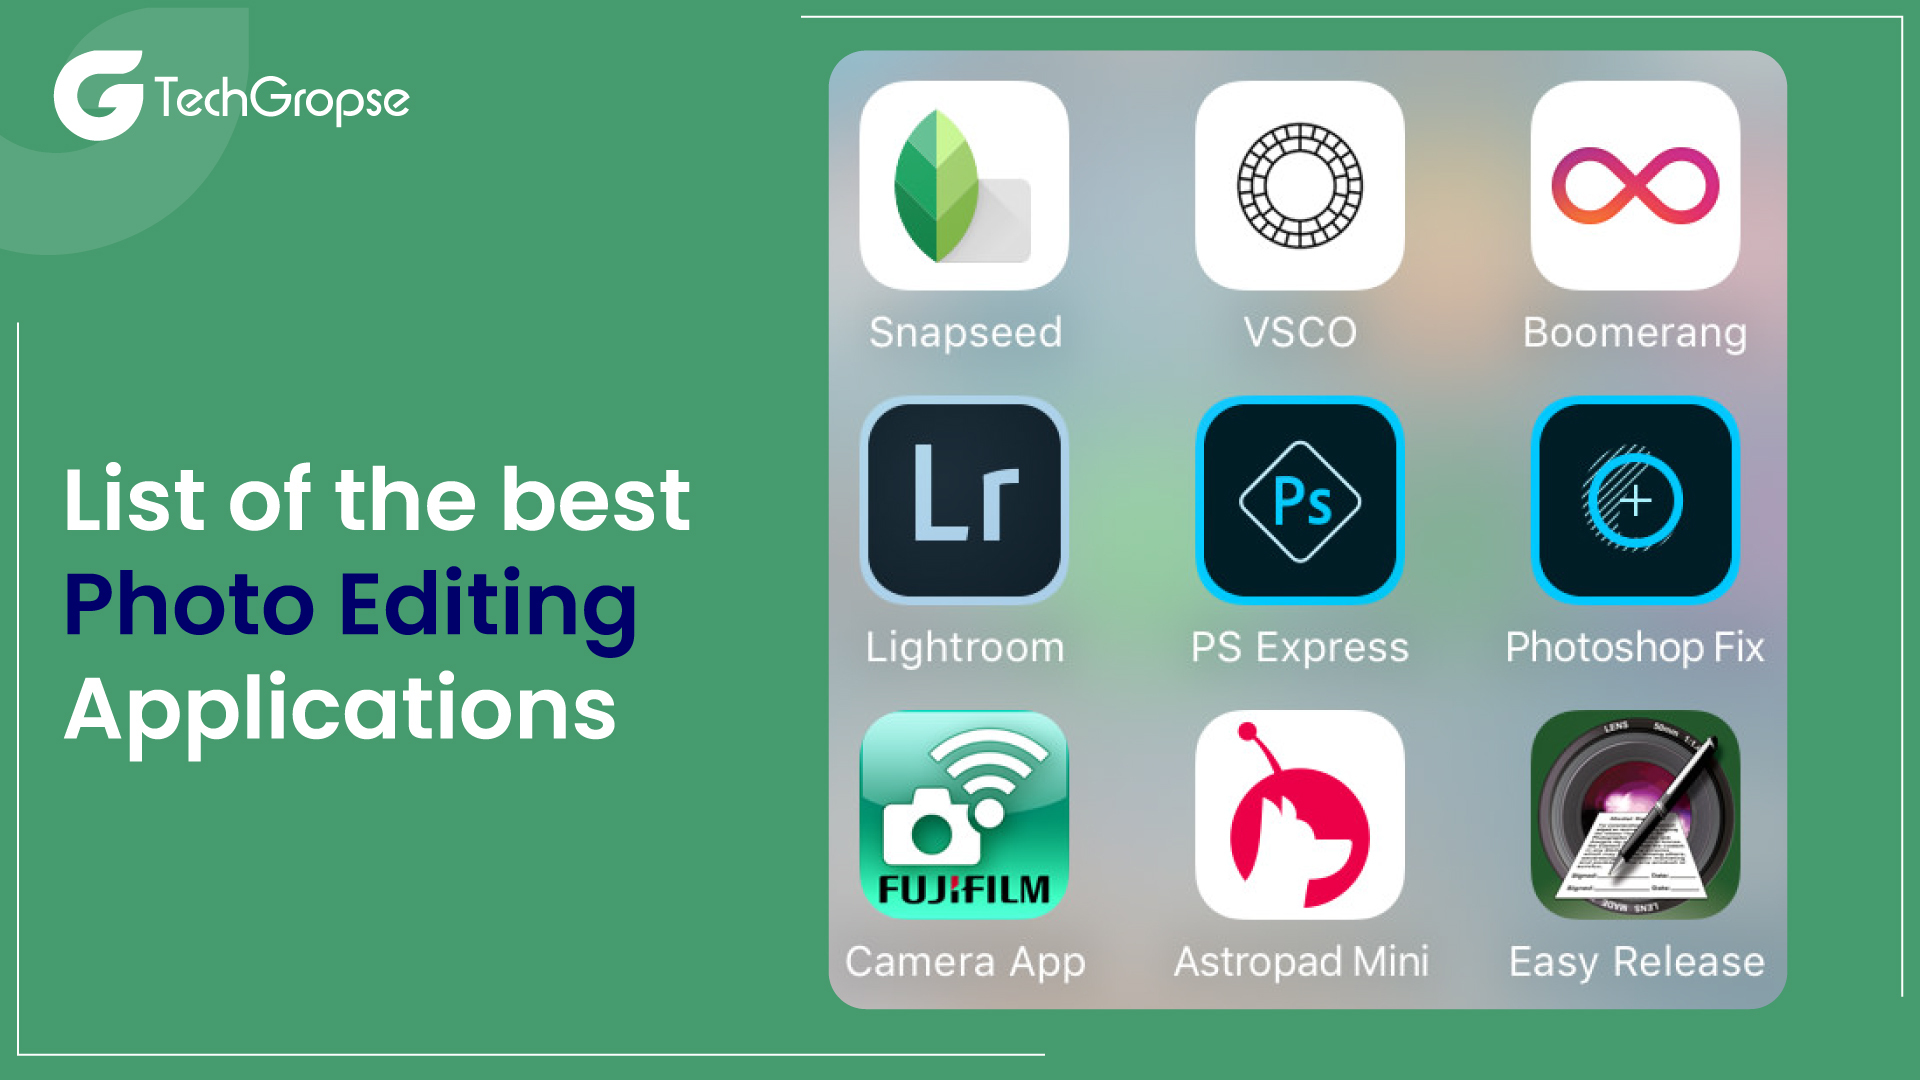 List of the best Photo Editing Applications